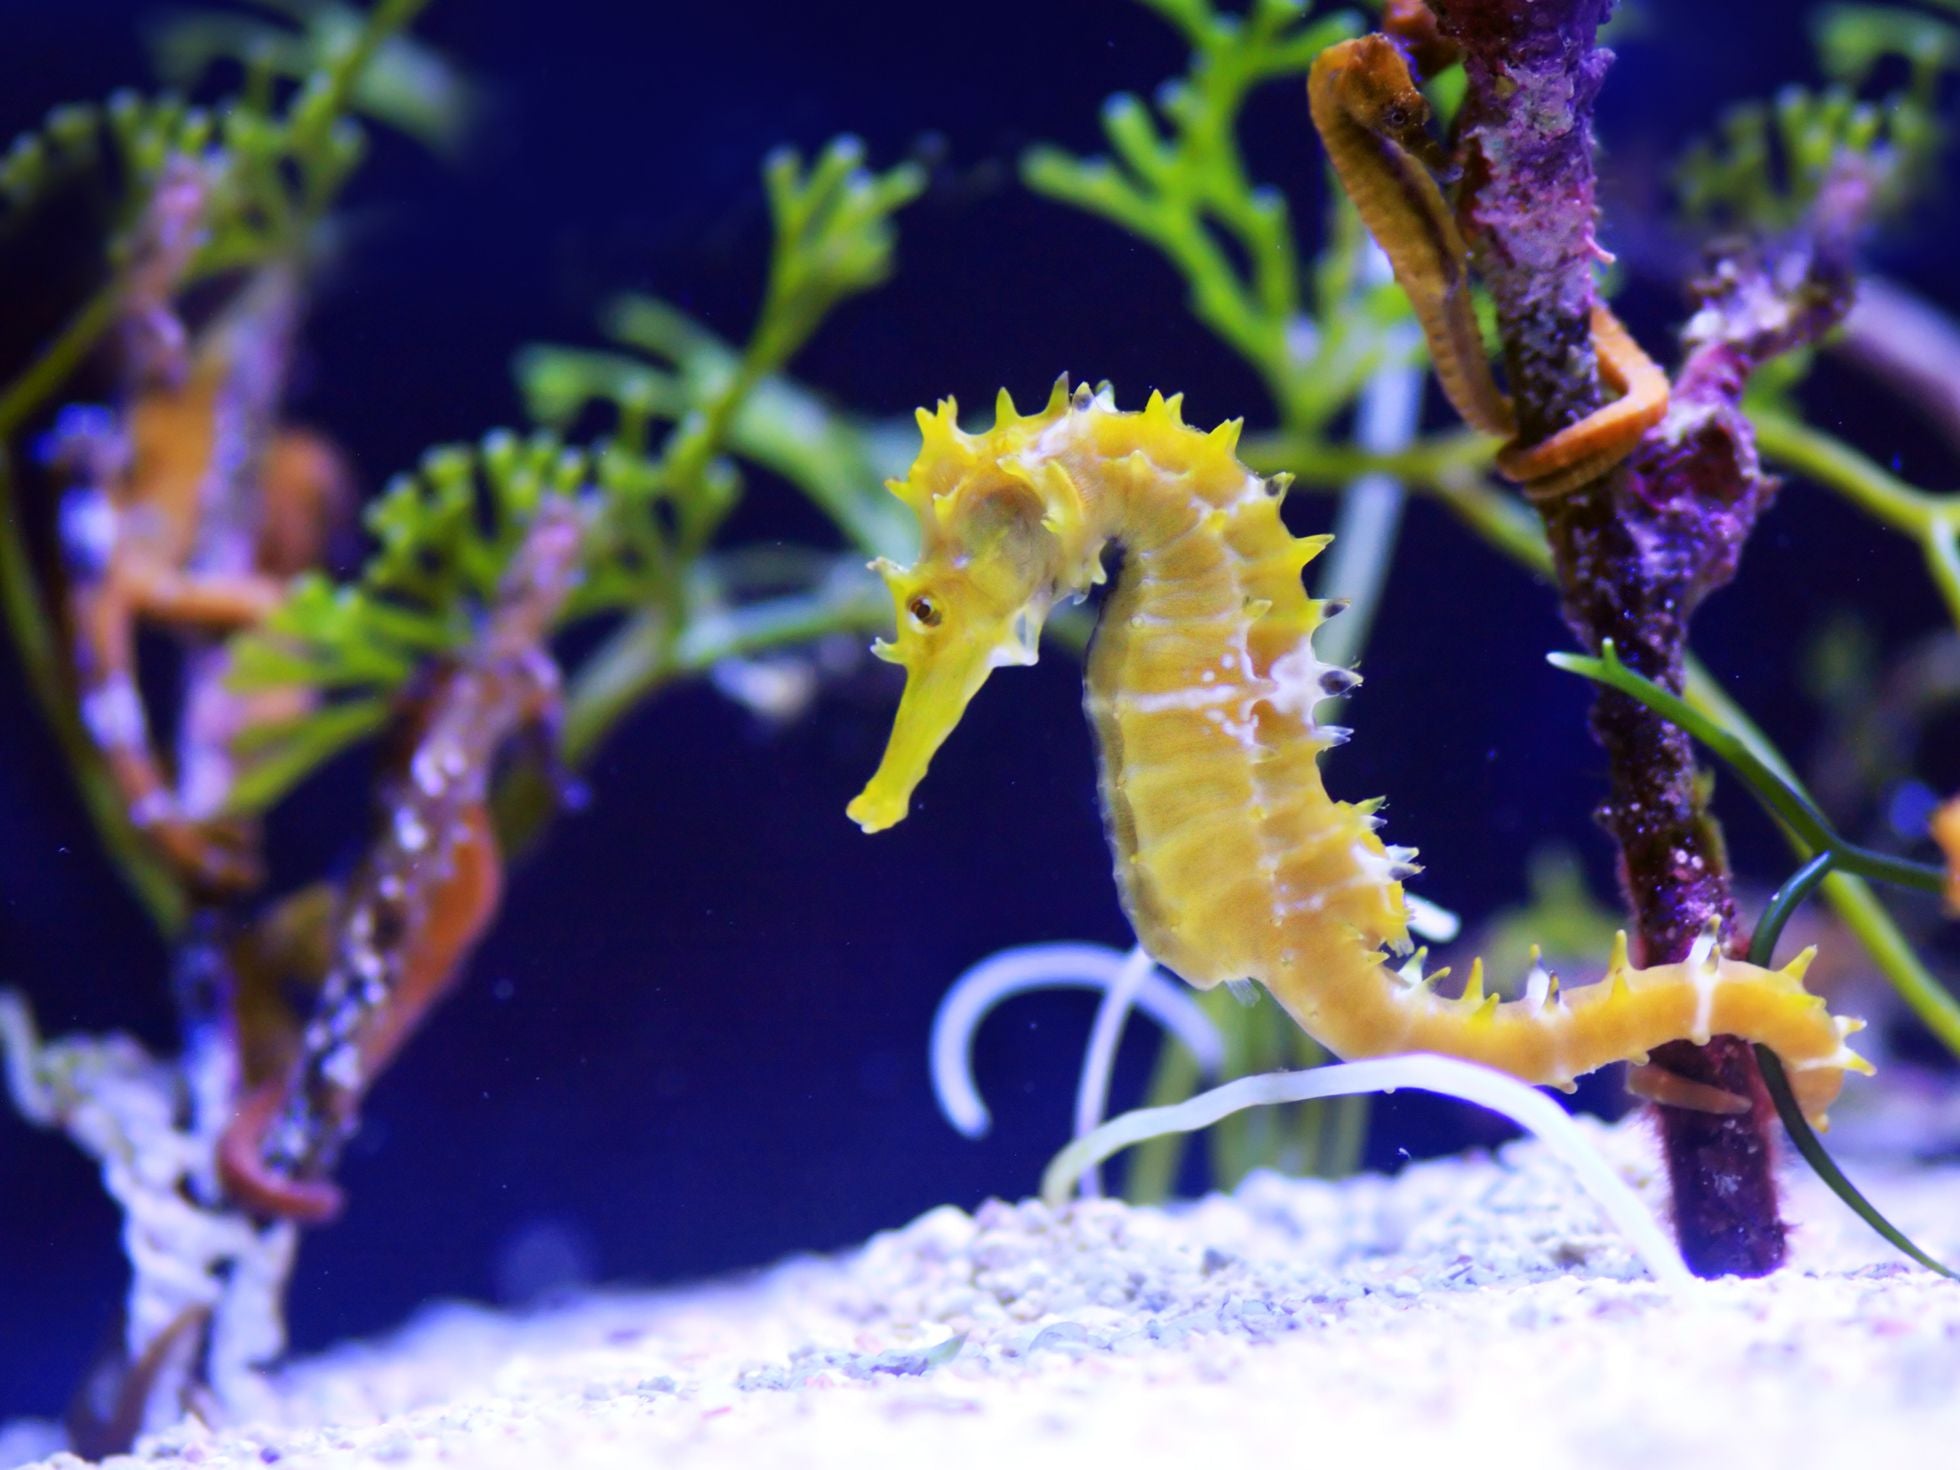 Where are seahorses survive in the ocean